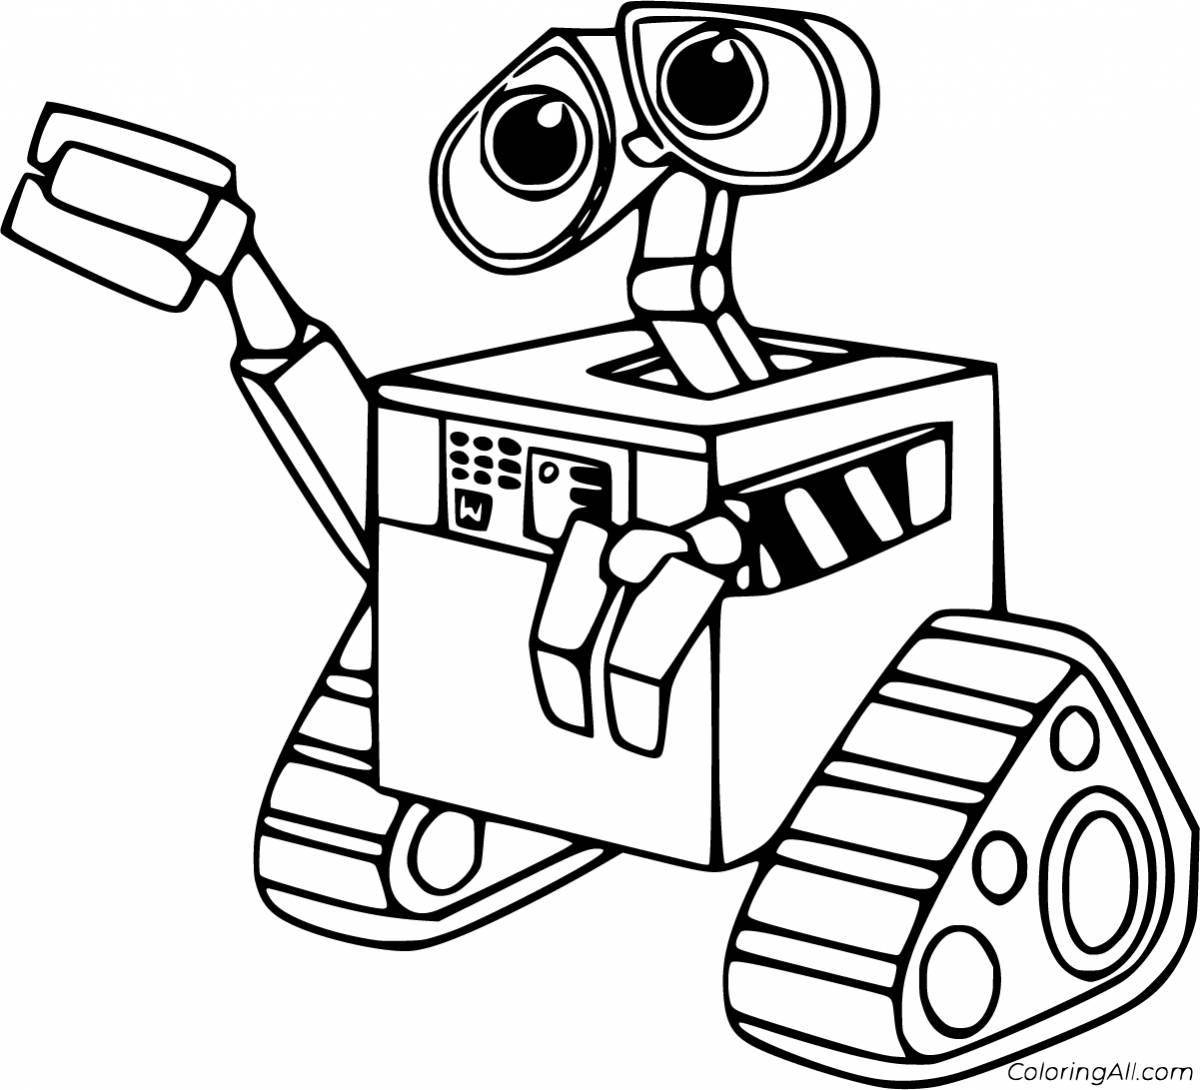 Coloring book charming robot valley